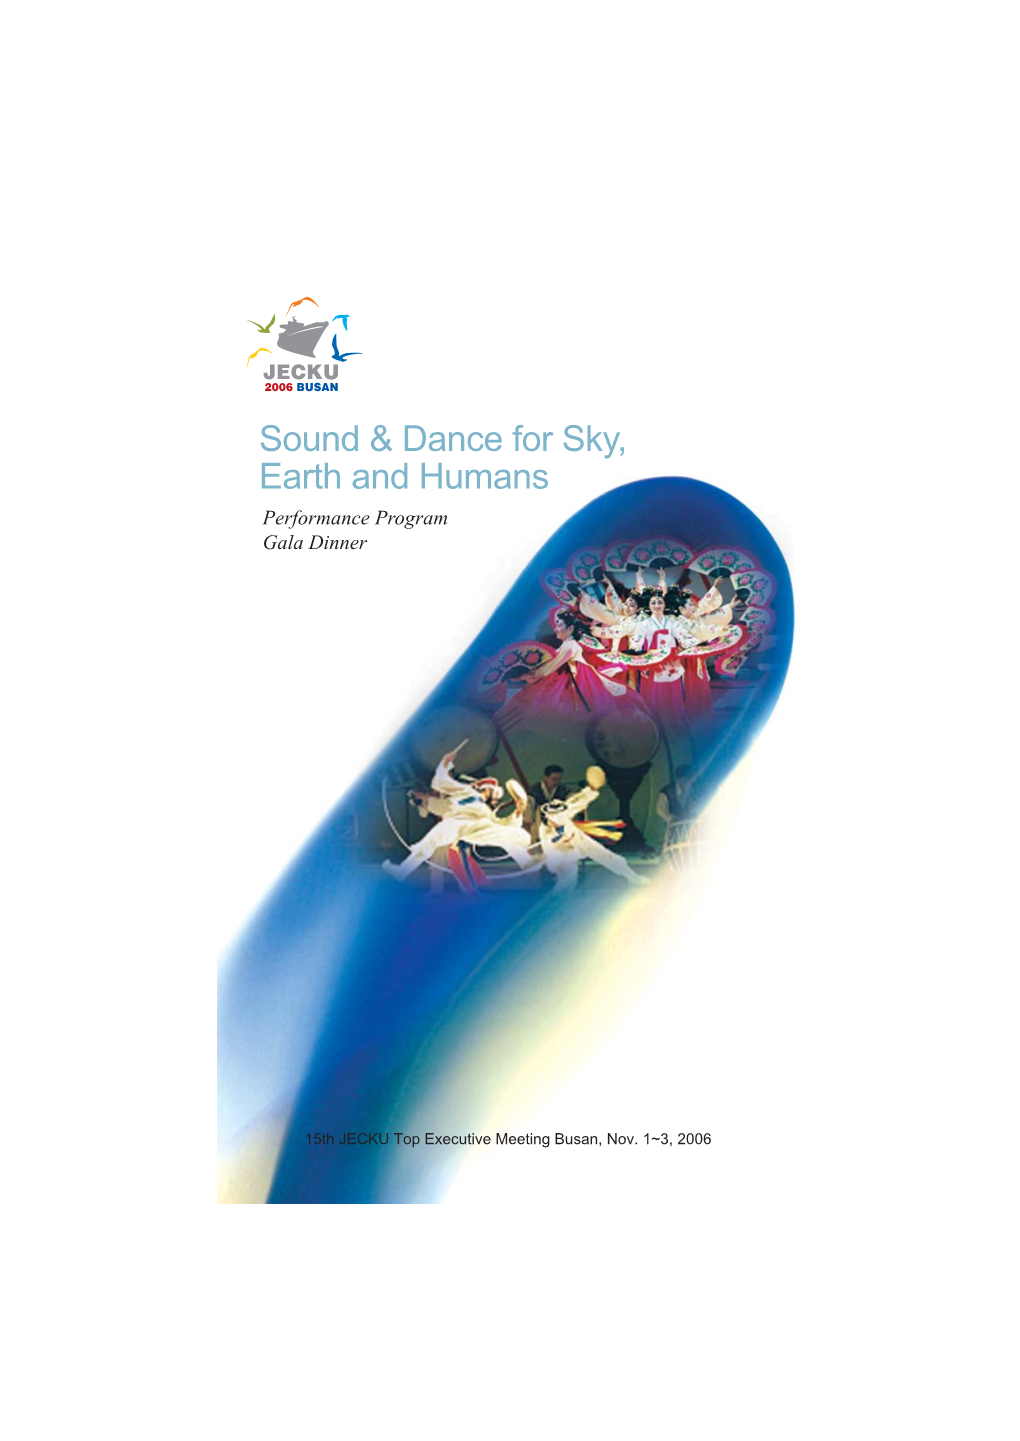 Sound & Dance for Sky, Earth and Humans